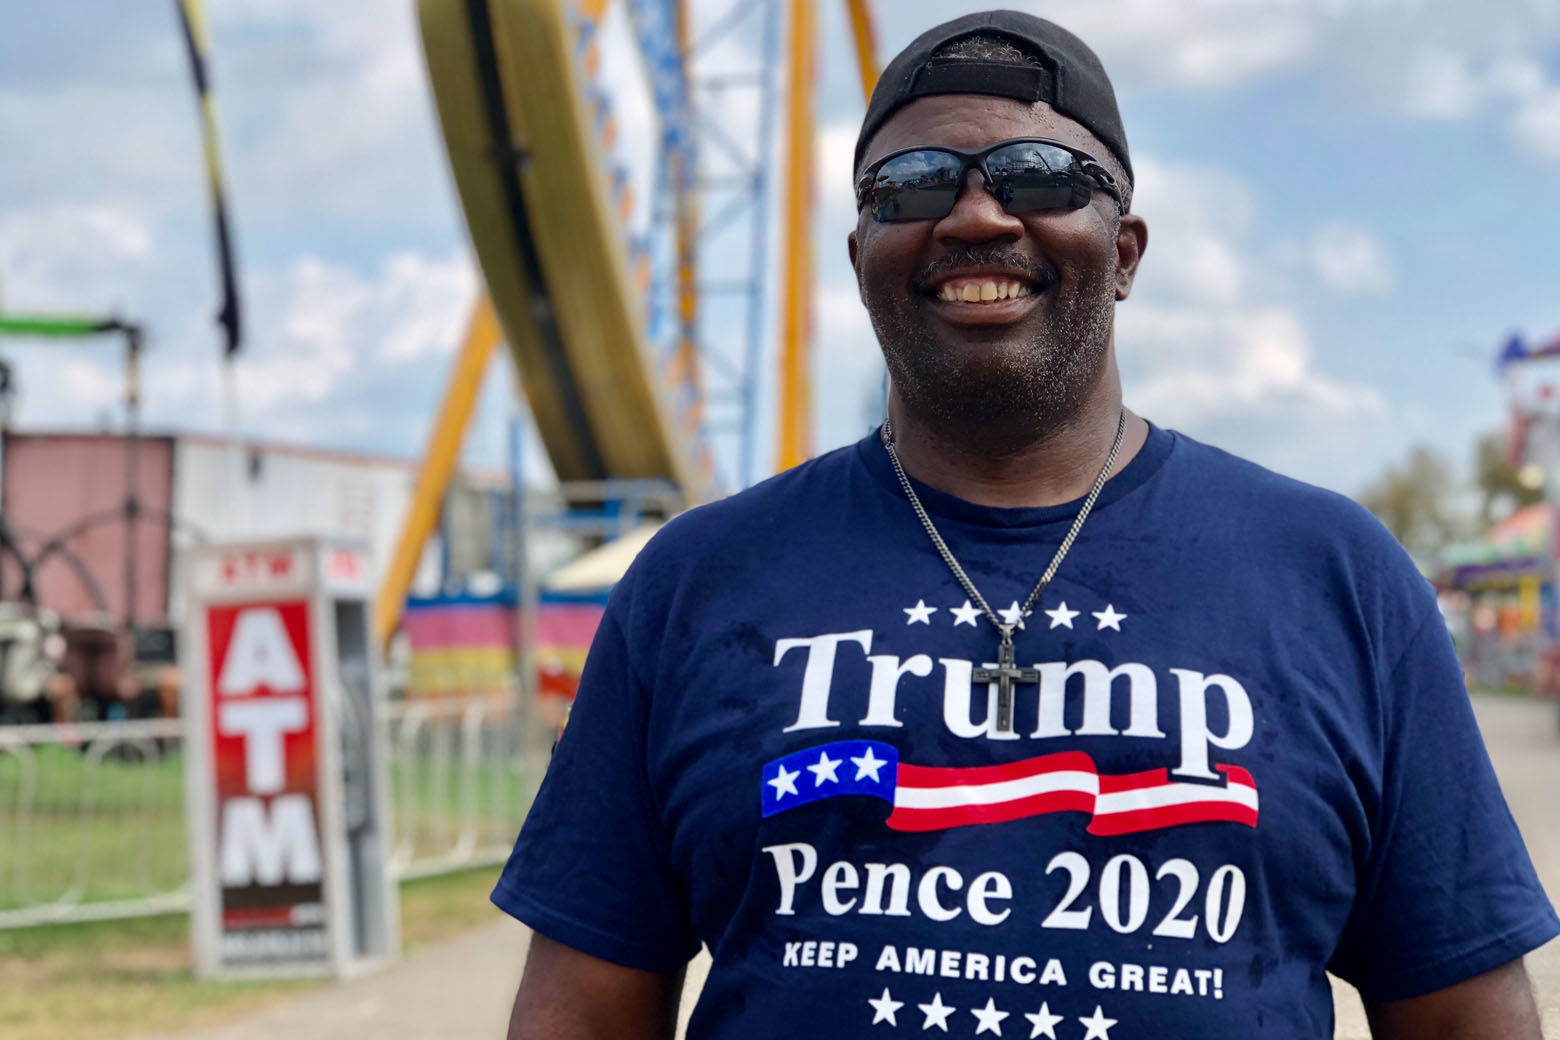 Terry — he didn’t want to give his last name — says he is a proud Trump supporter. He says he’ll definitely vote to re-elect Republican Gov. Larry Hogan. (WTOP/Kate Ryan)